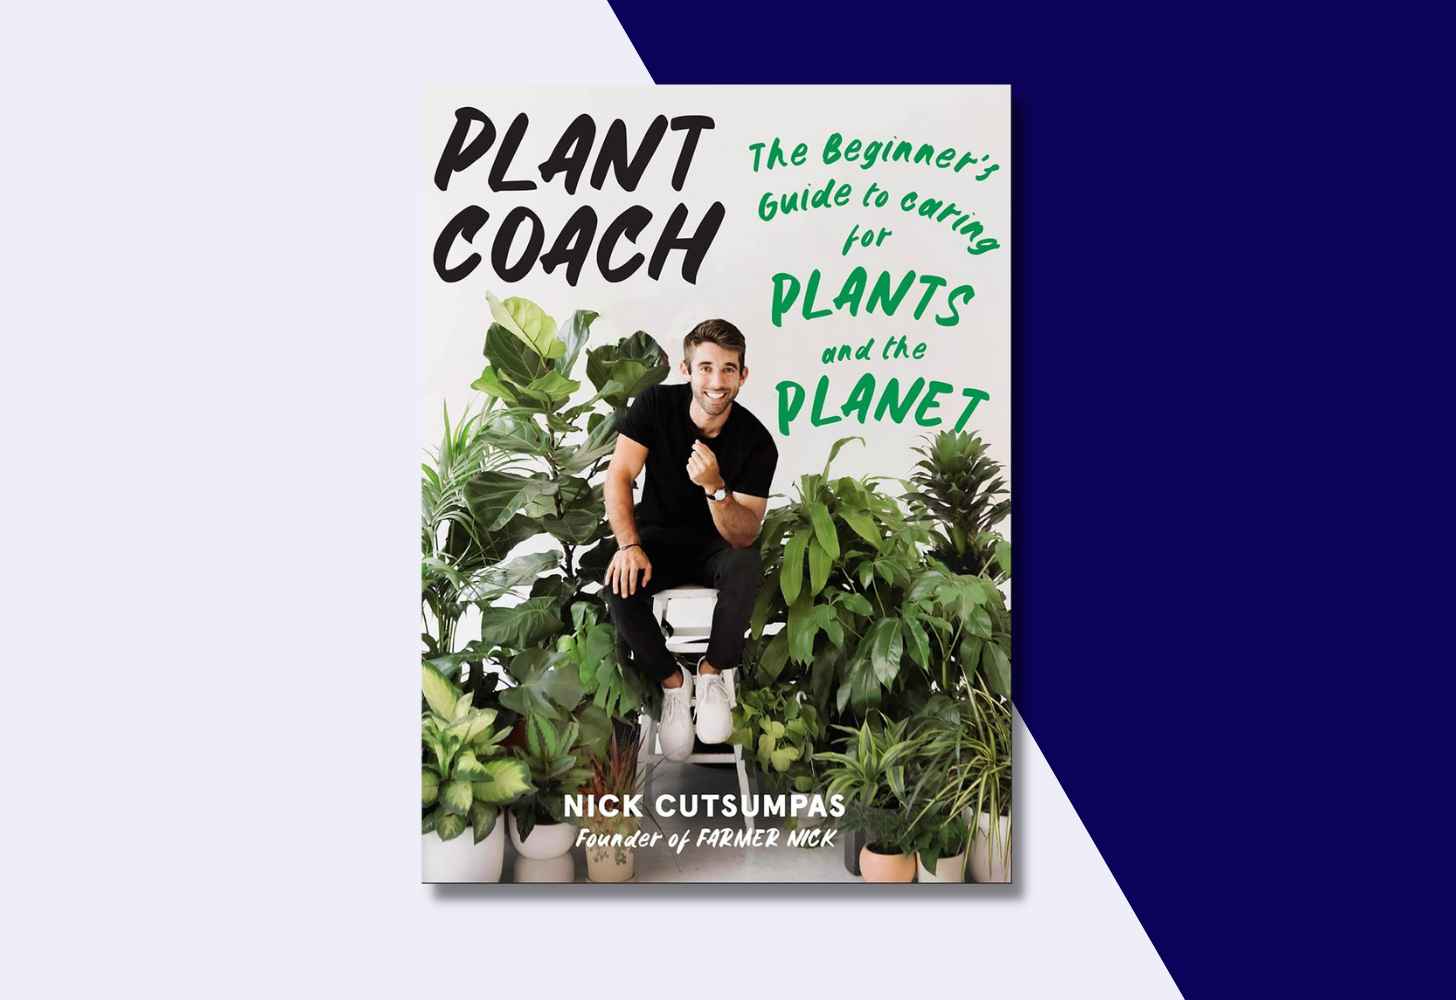 The Cover Of “Plant Coach: The Beginner’s Guide to Caring for Plants and the Planet” by Nick Cutsumpas